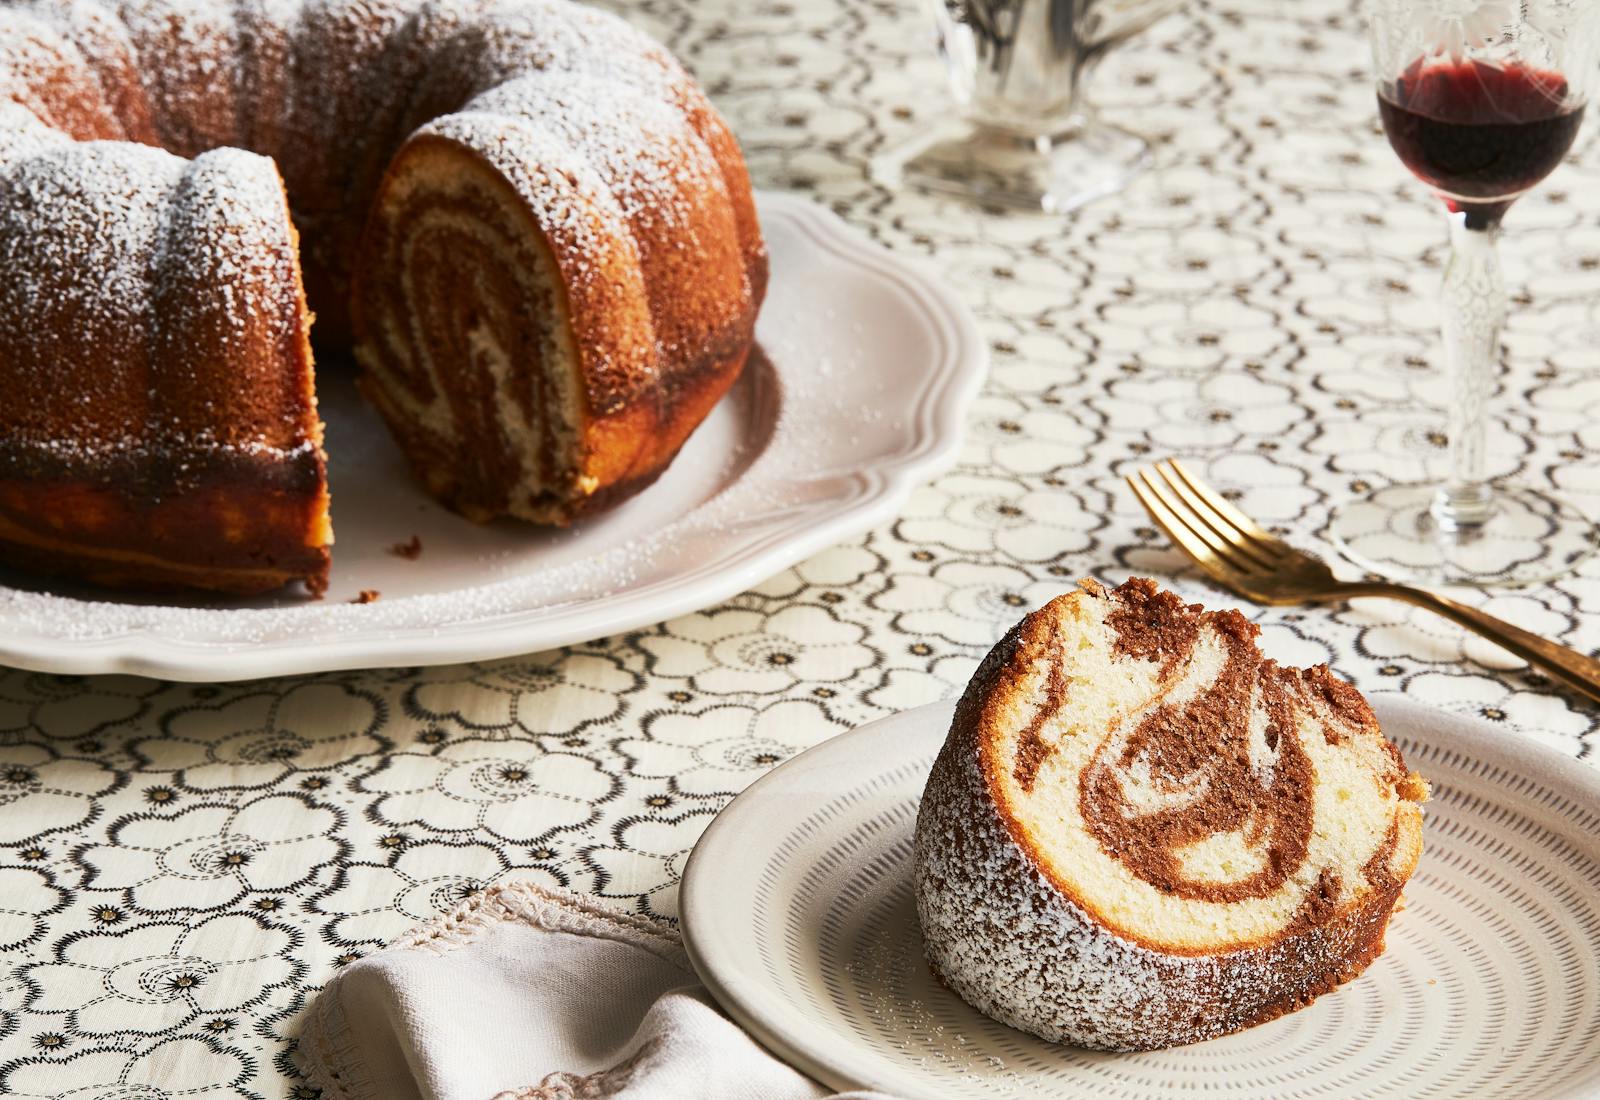 Marble bundt cake on white plate atop white tablecloth.